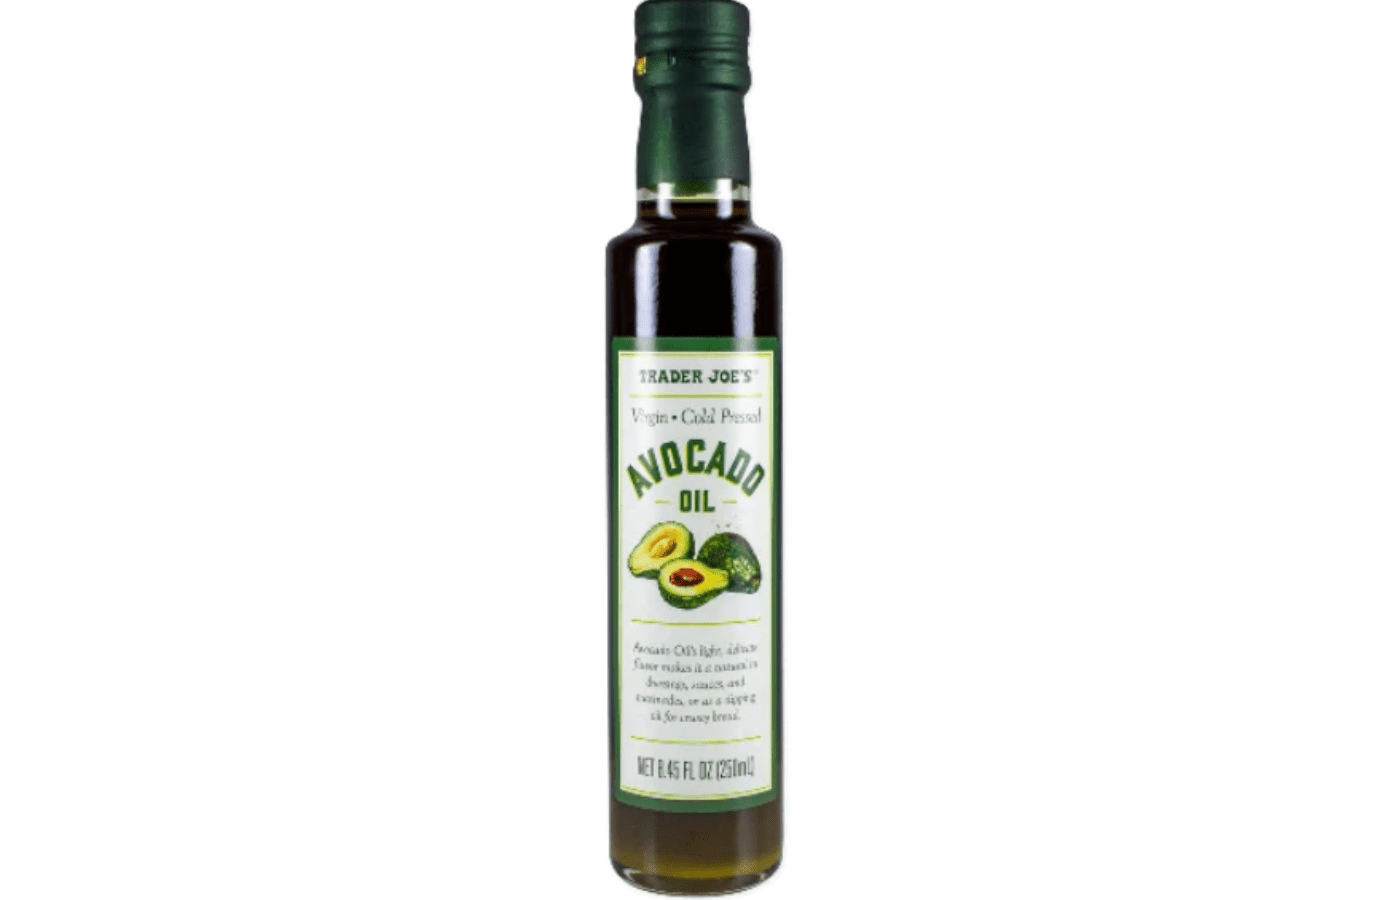 is trader joes avocado oil real